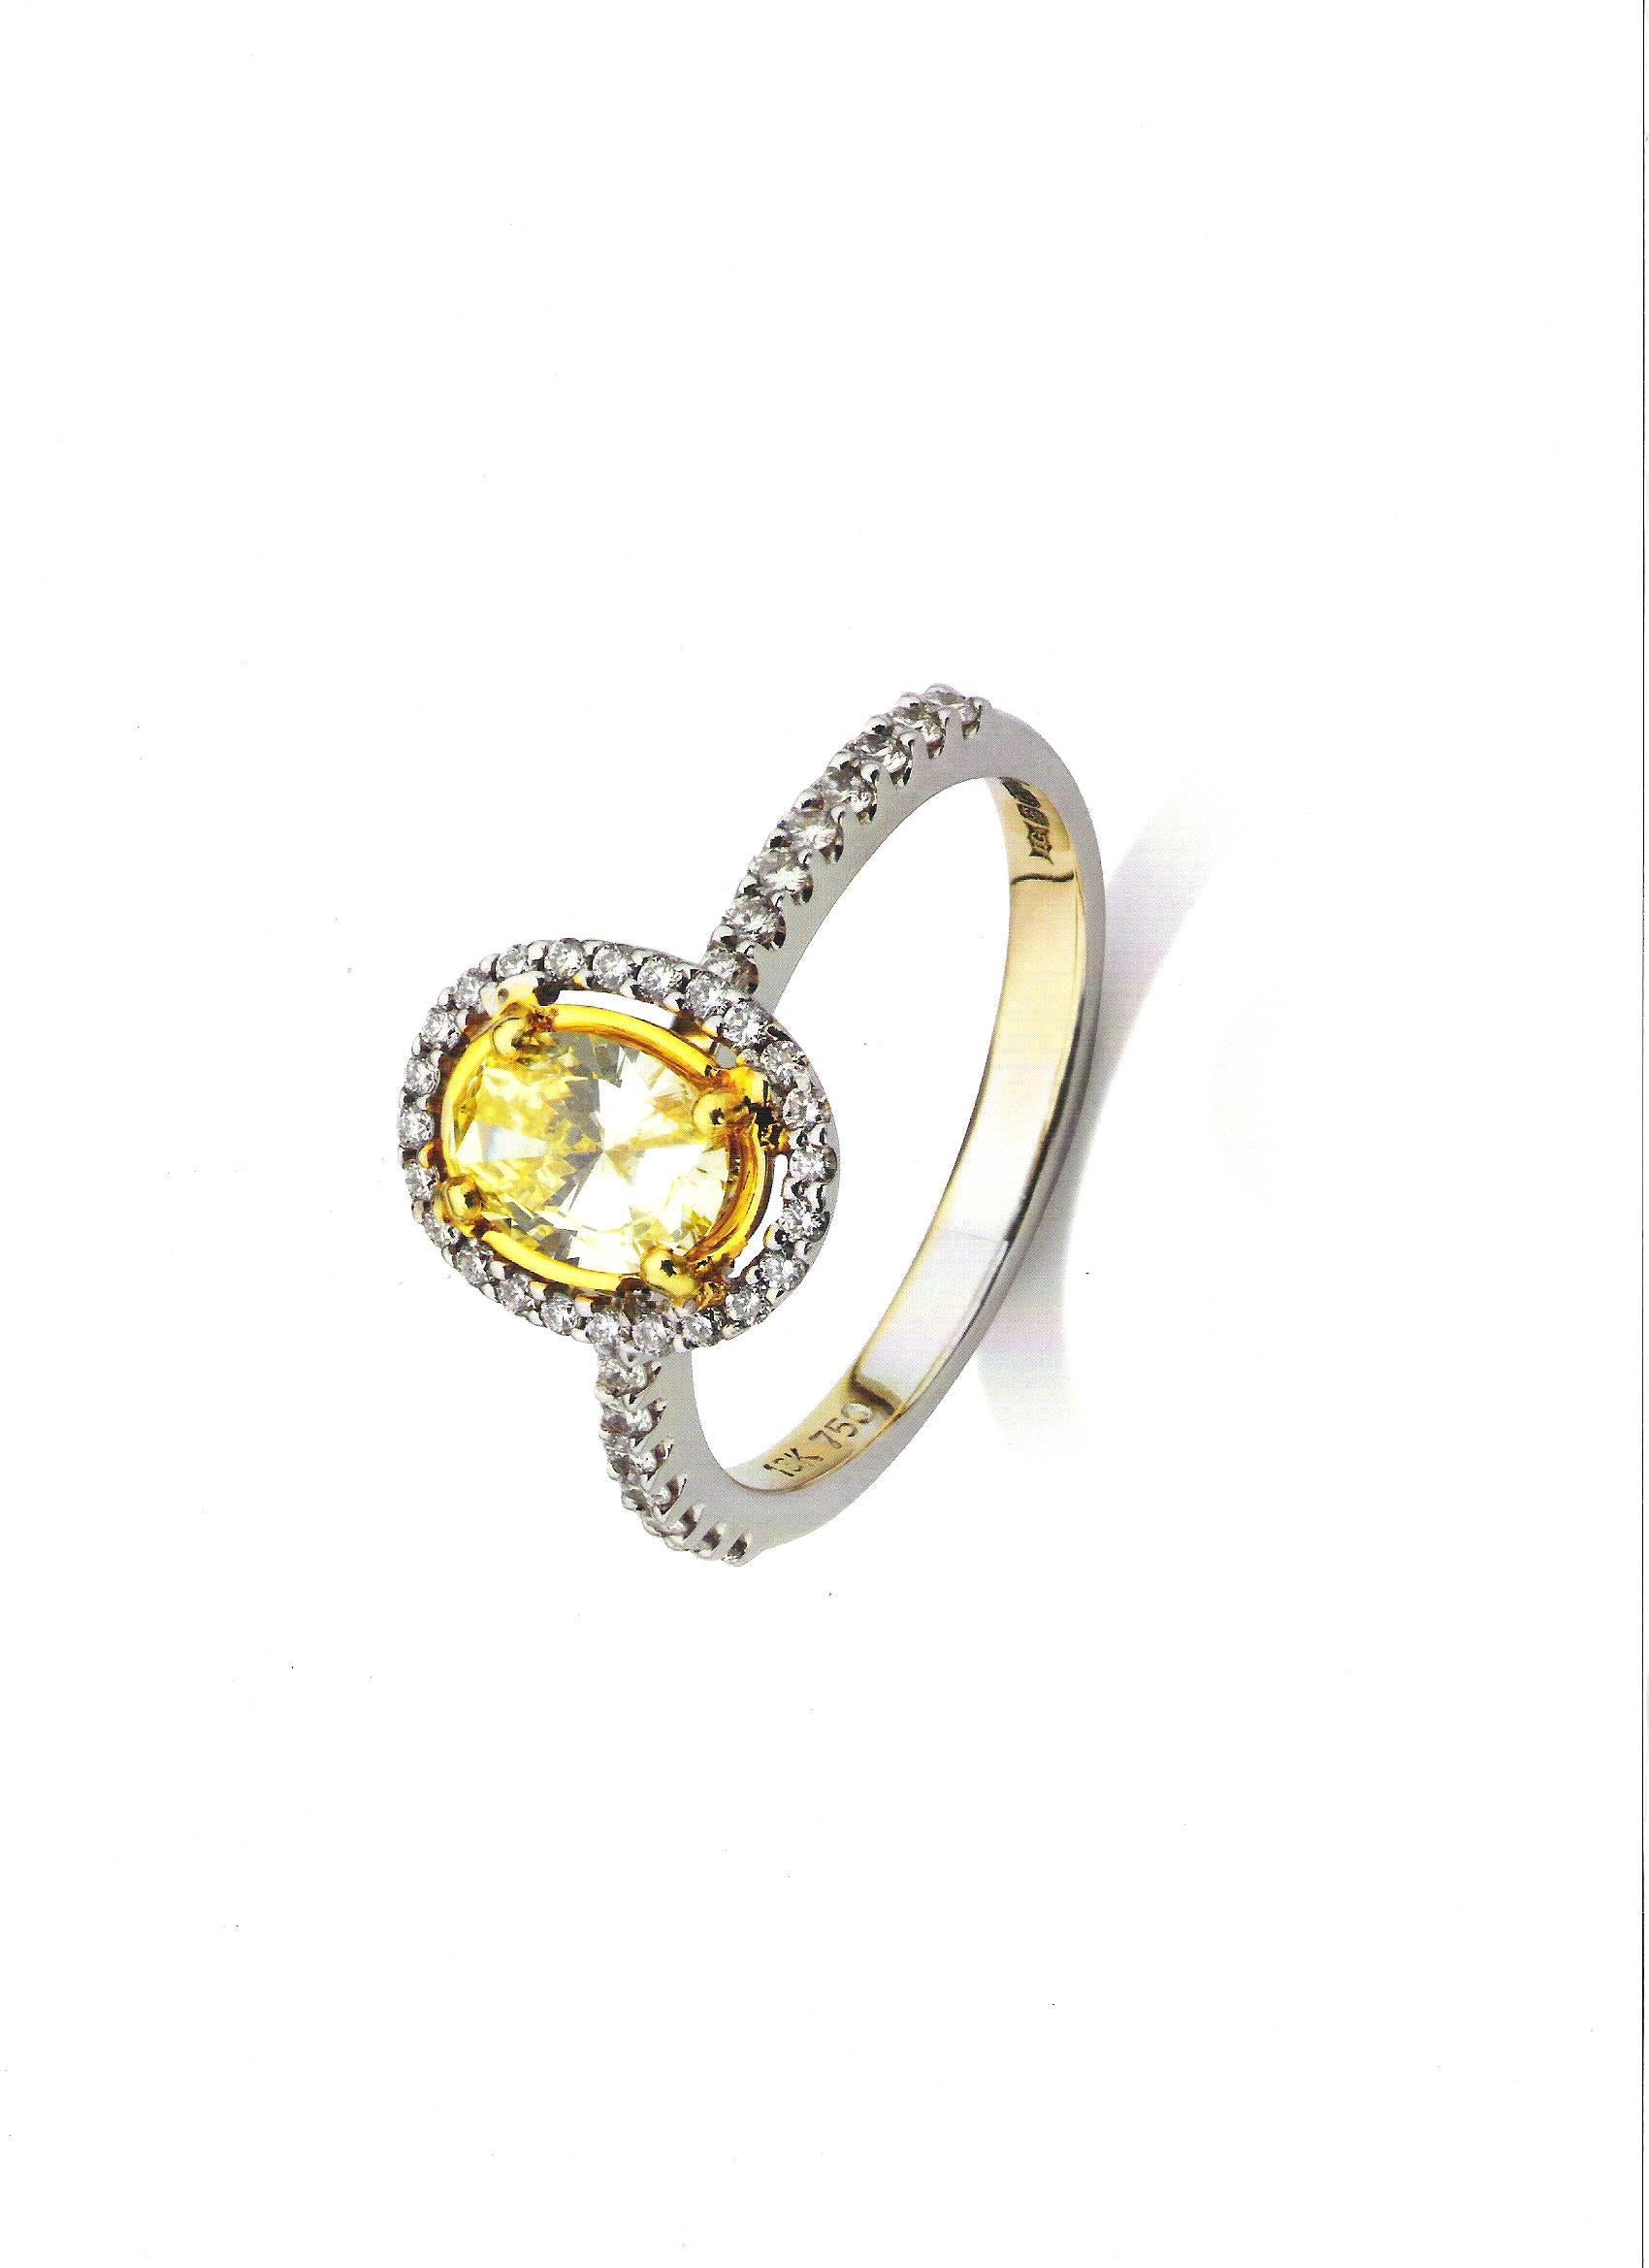 Comprising an IGI Certified, 0.63 Carat, Fancy Yellow, Oval cut centre stone – Set in 18 Carat White Gold with 40 individual brilliant diamonds totalling 0.20 carats. – 

Total diamond weight = 0.83 carats

Perfect as an engagement ring or as a